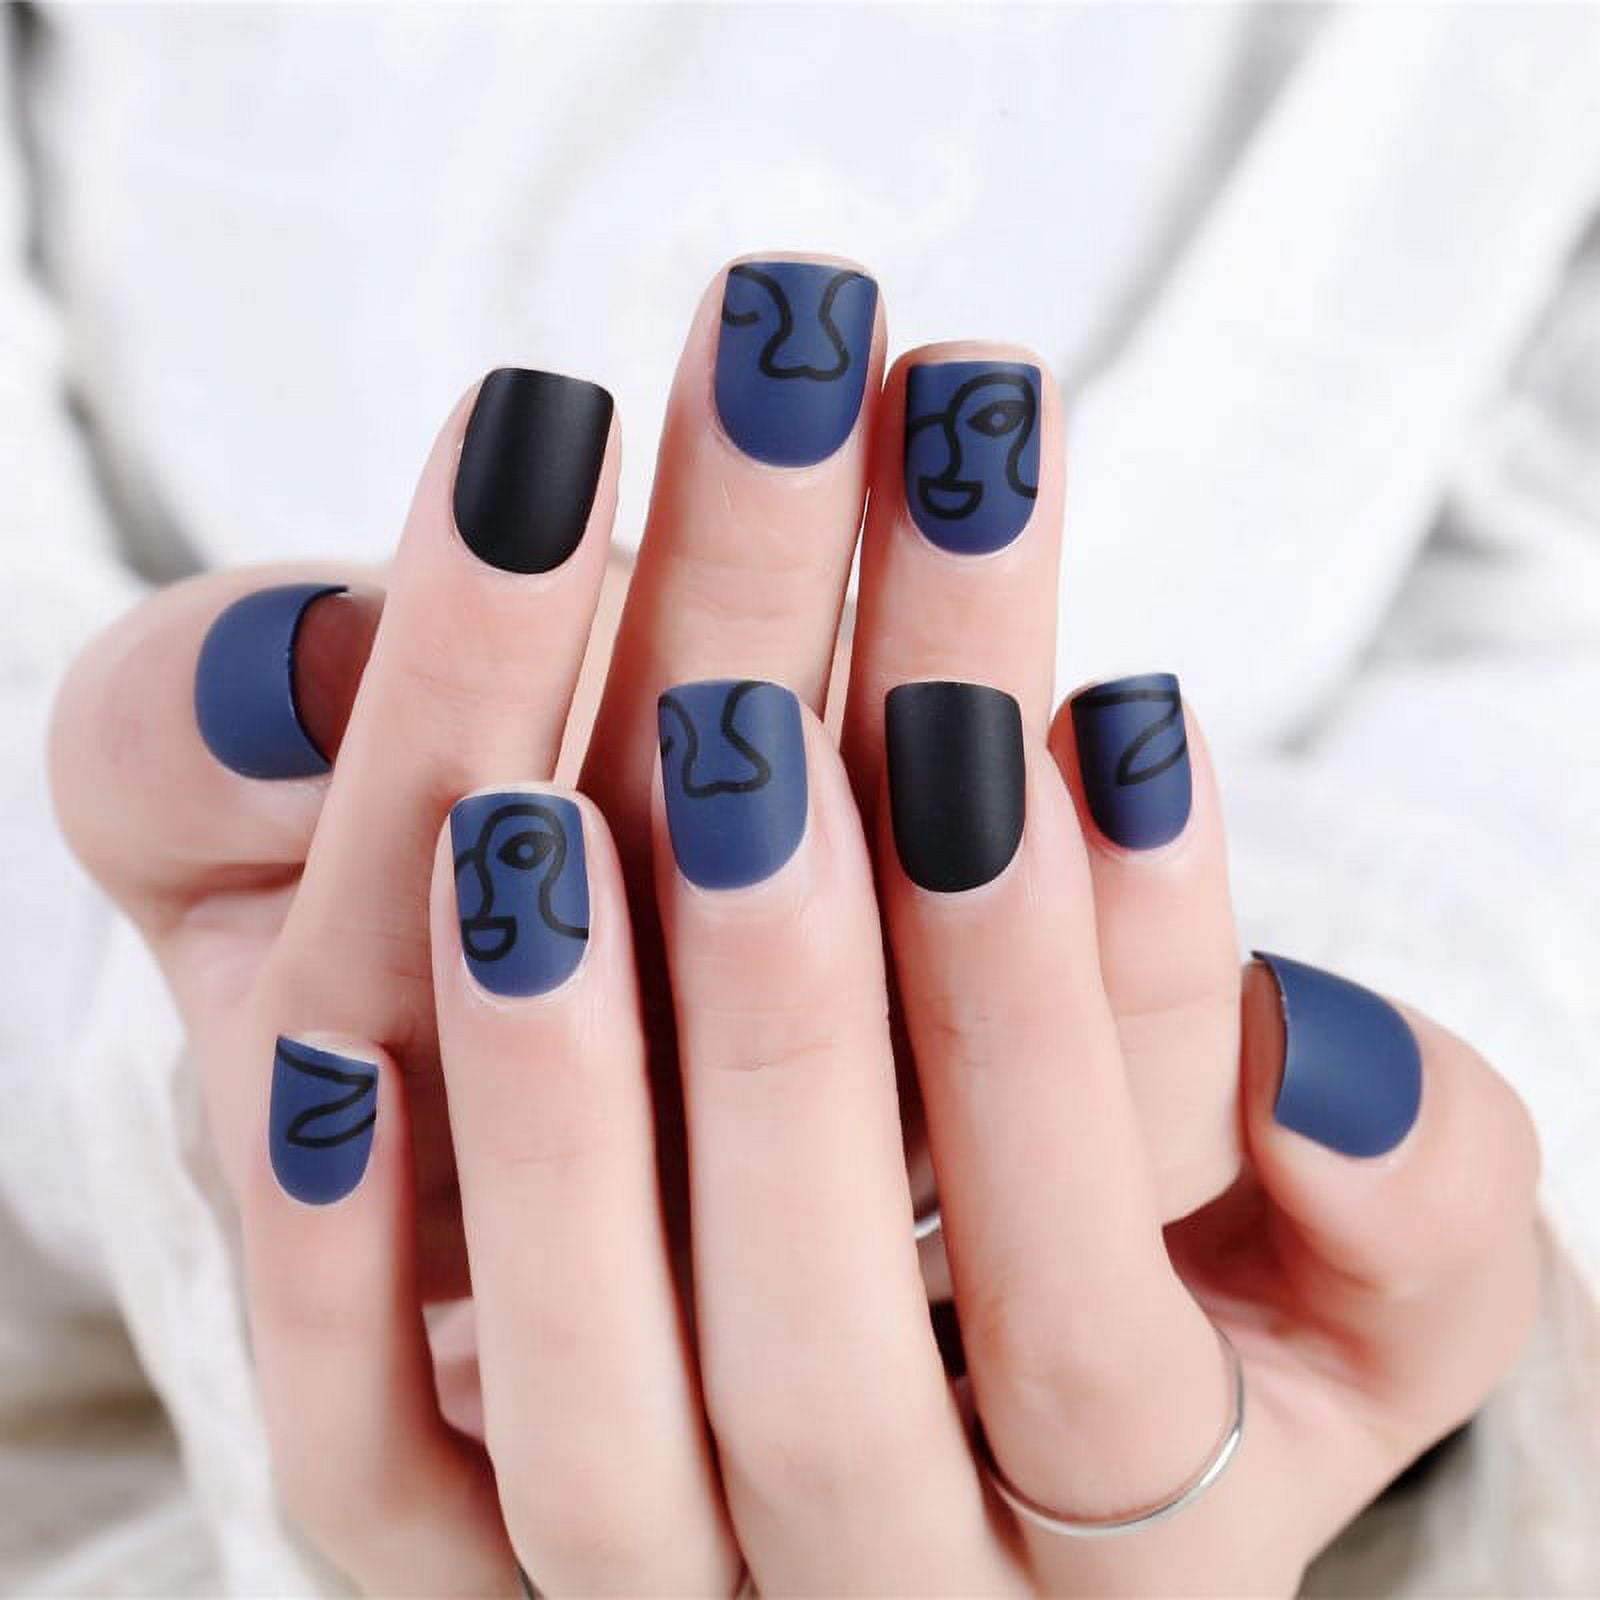 38 Cat-Eye Nails That'll Convince You to Try the Trend